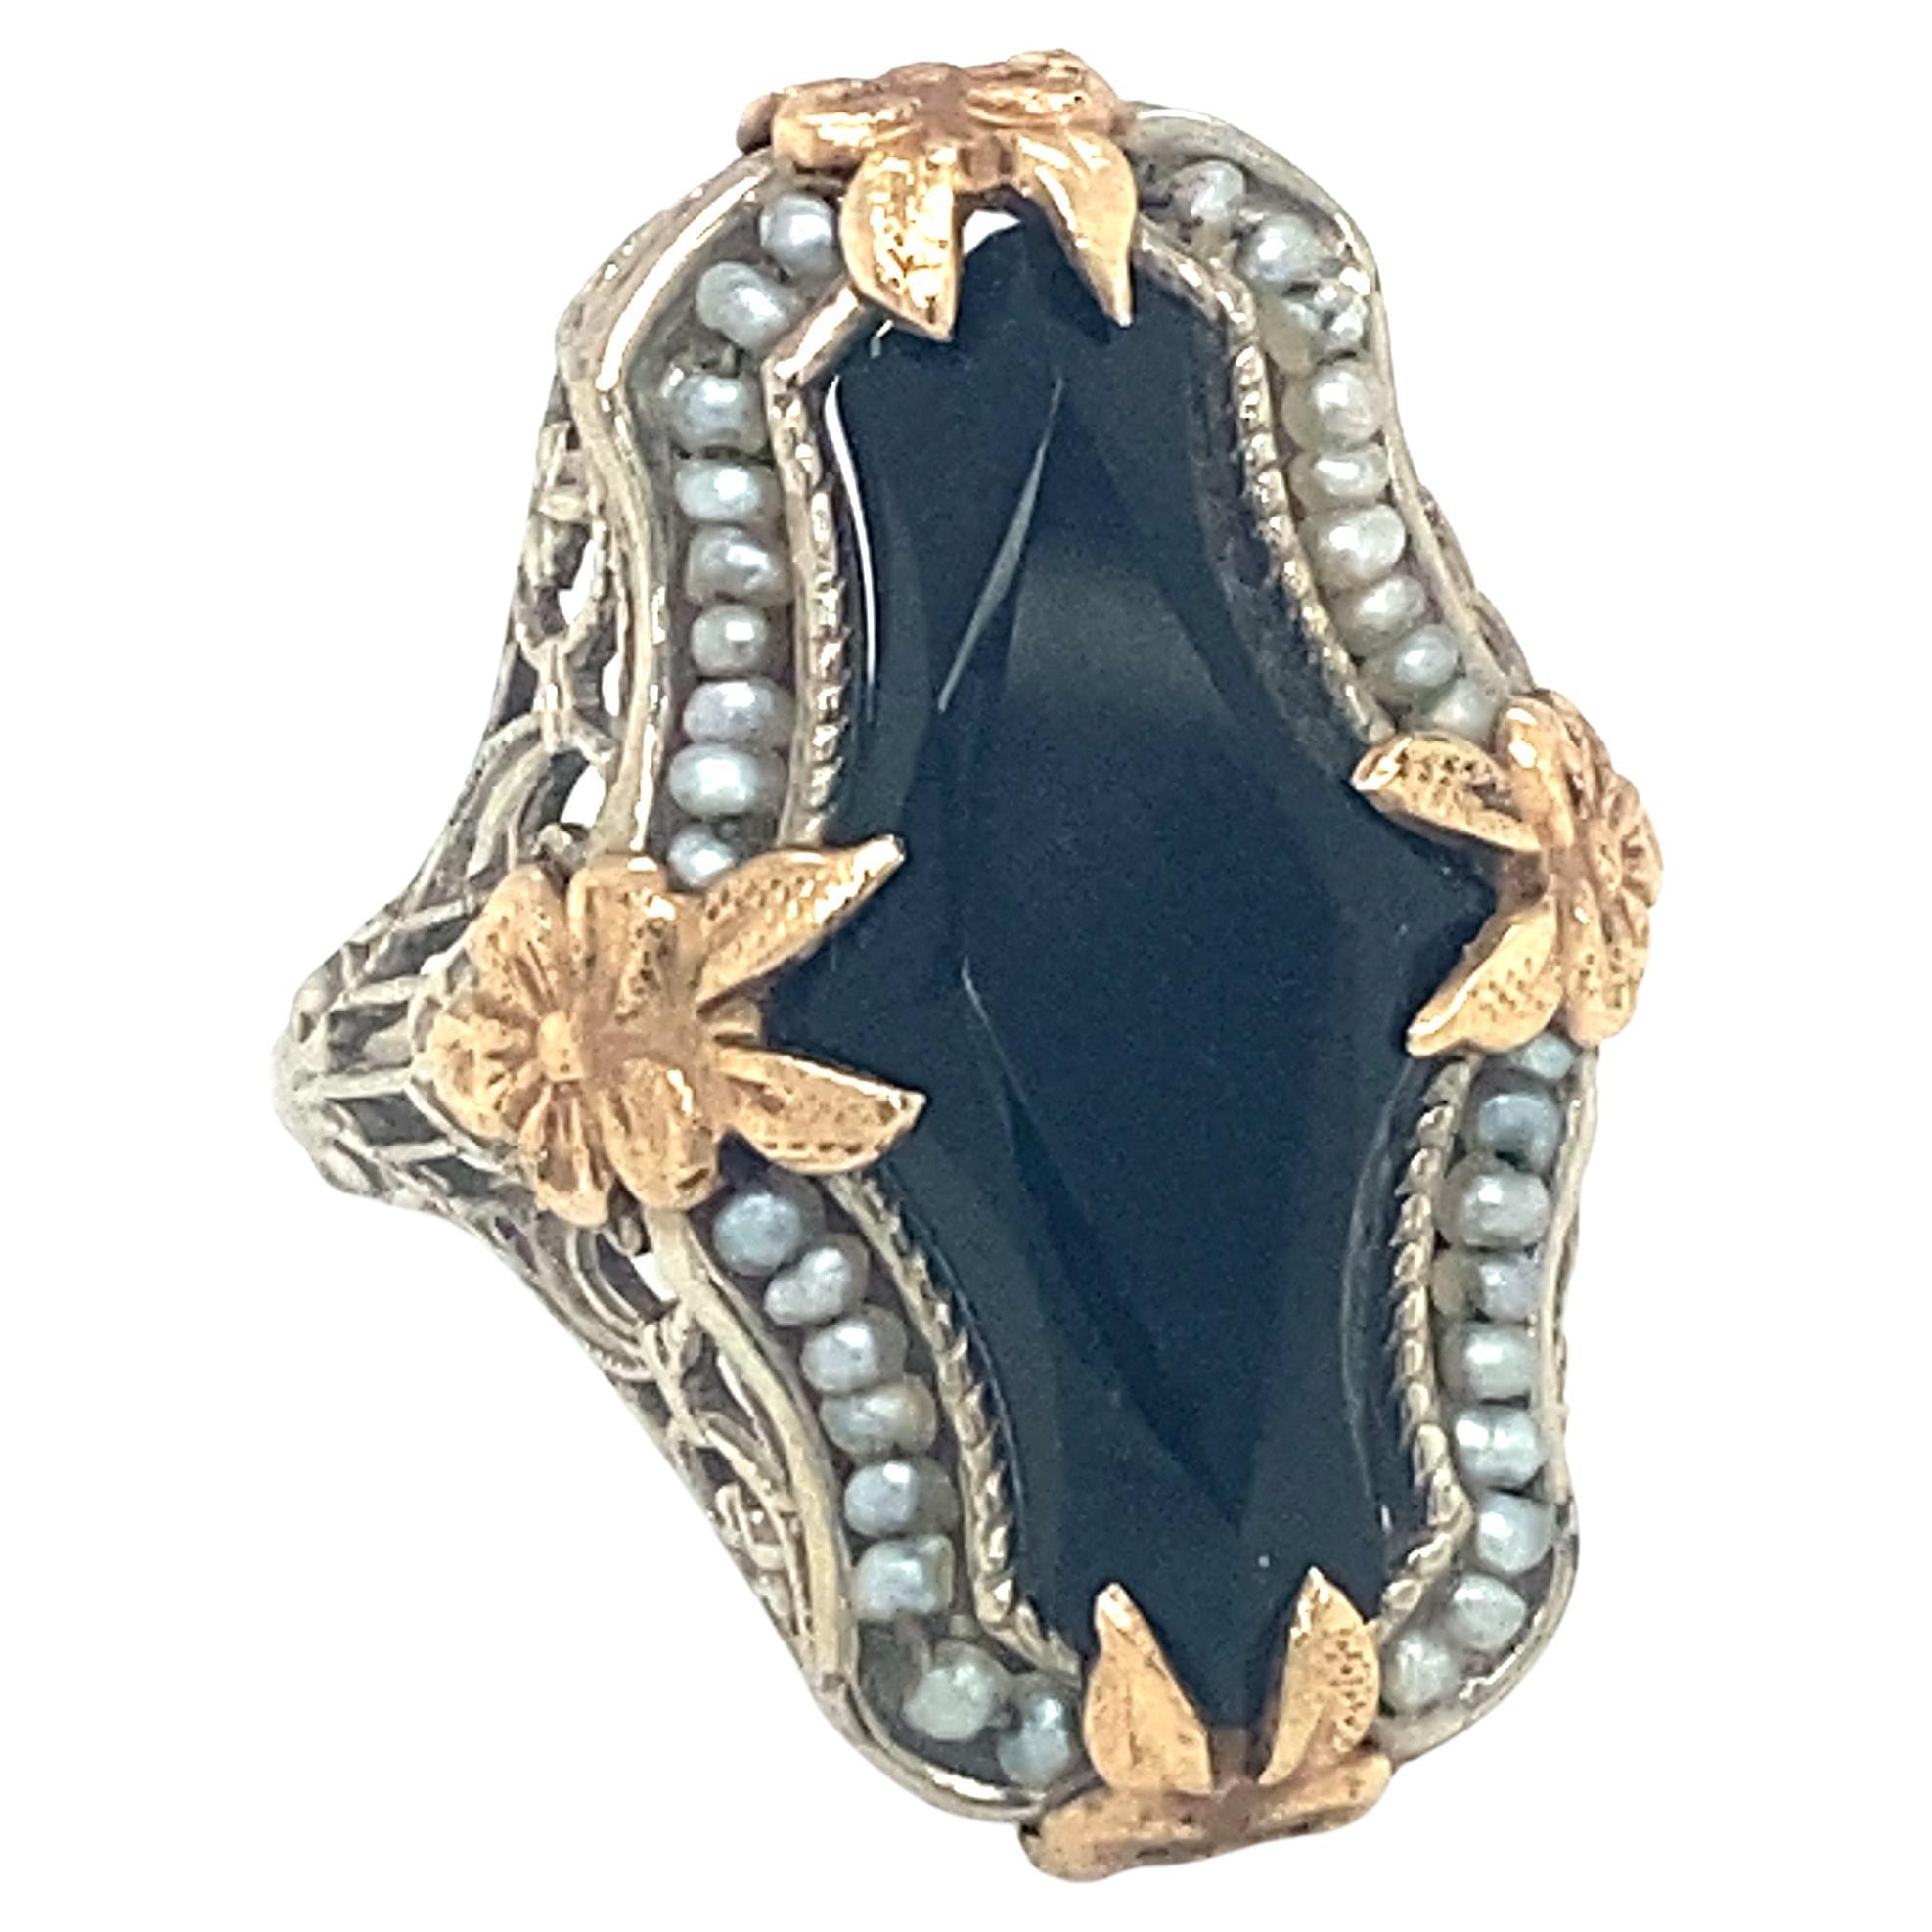 Circa 1920s Art Deco Onyx and Pearl Ring in Two Tone 14K Gold For Sale